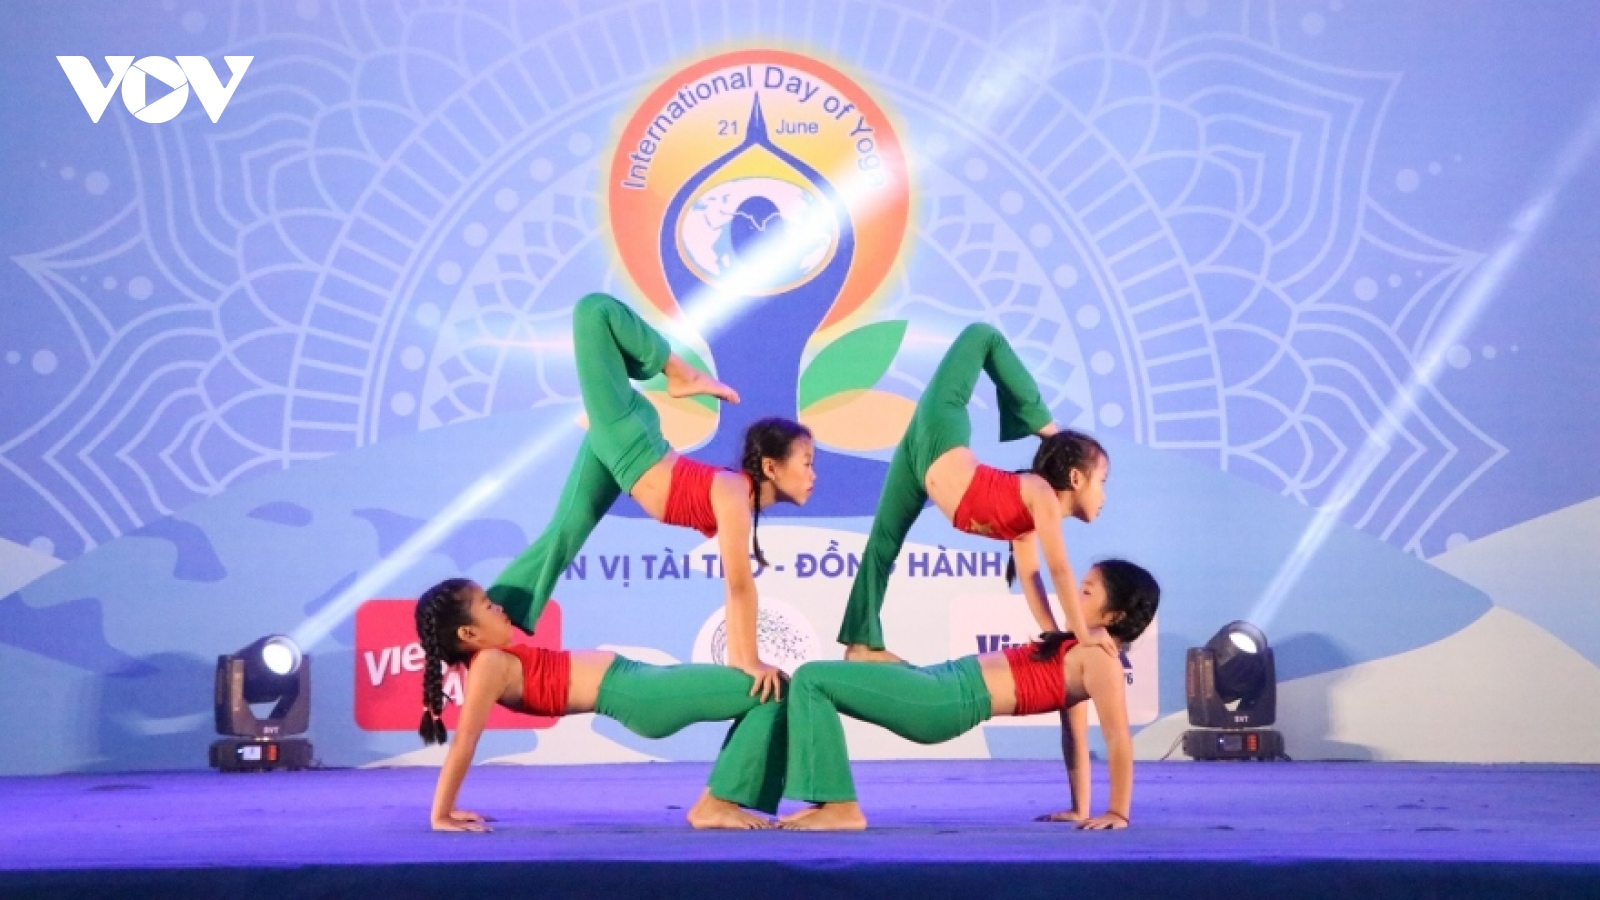 Over 1,500 people join yoga performance in Da Nang